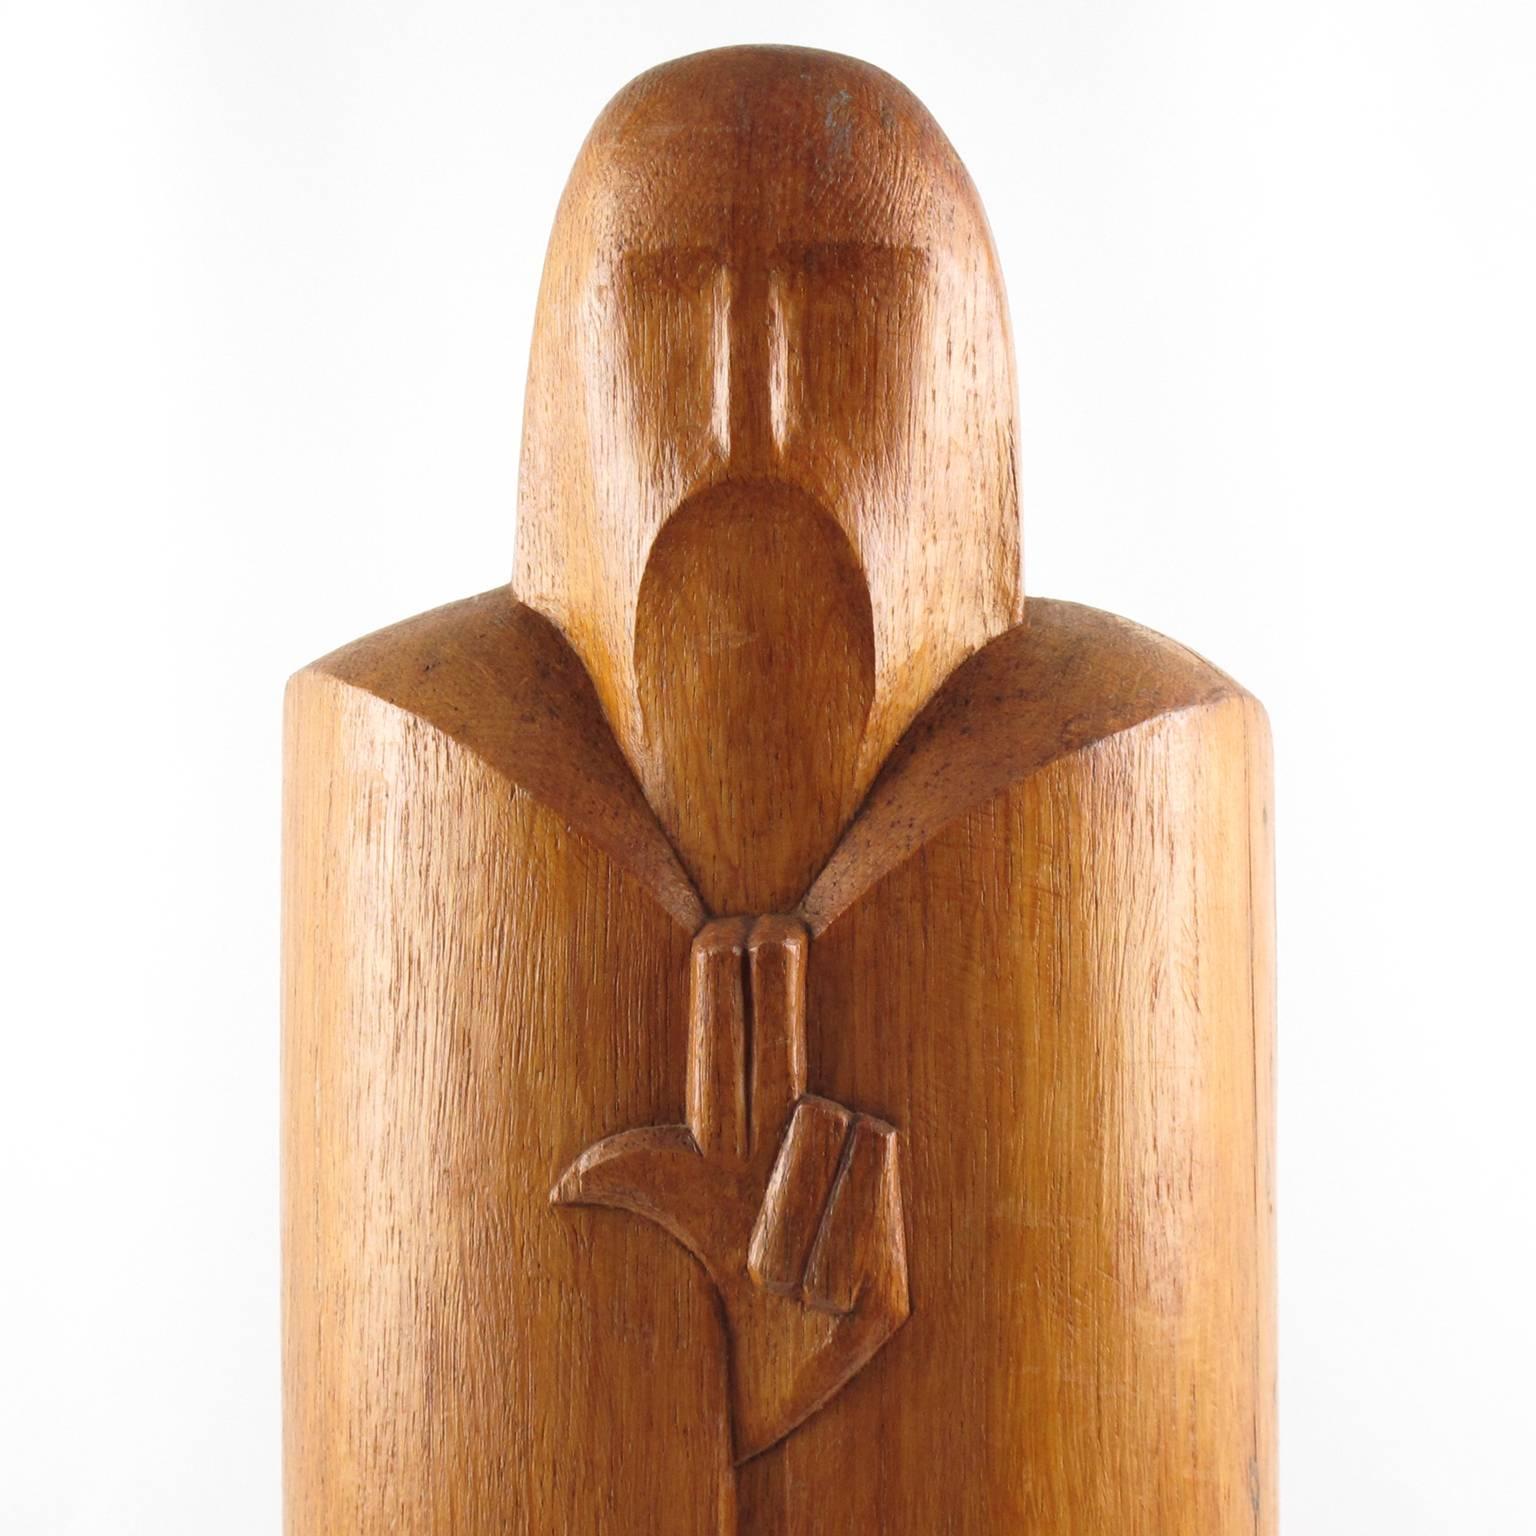 Rare Wood Sculpture Monk or Knight Design by Wenzel Profant, circa 1950s 1